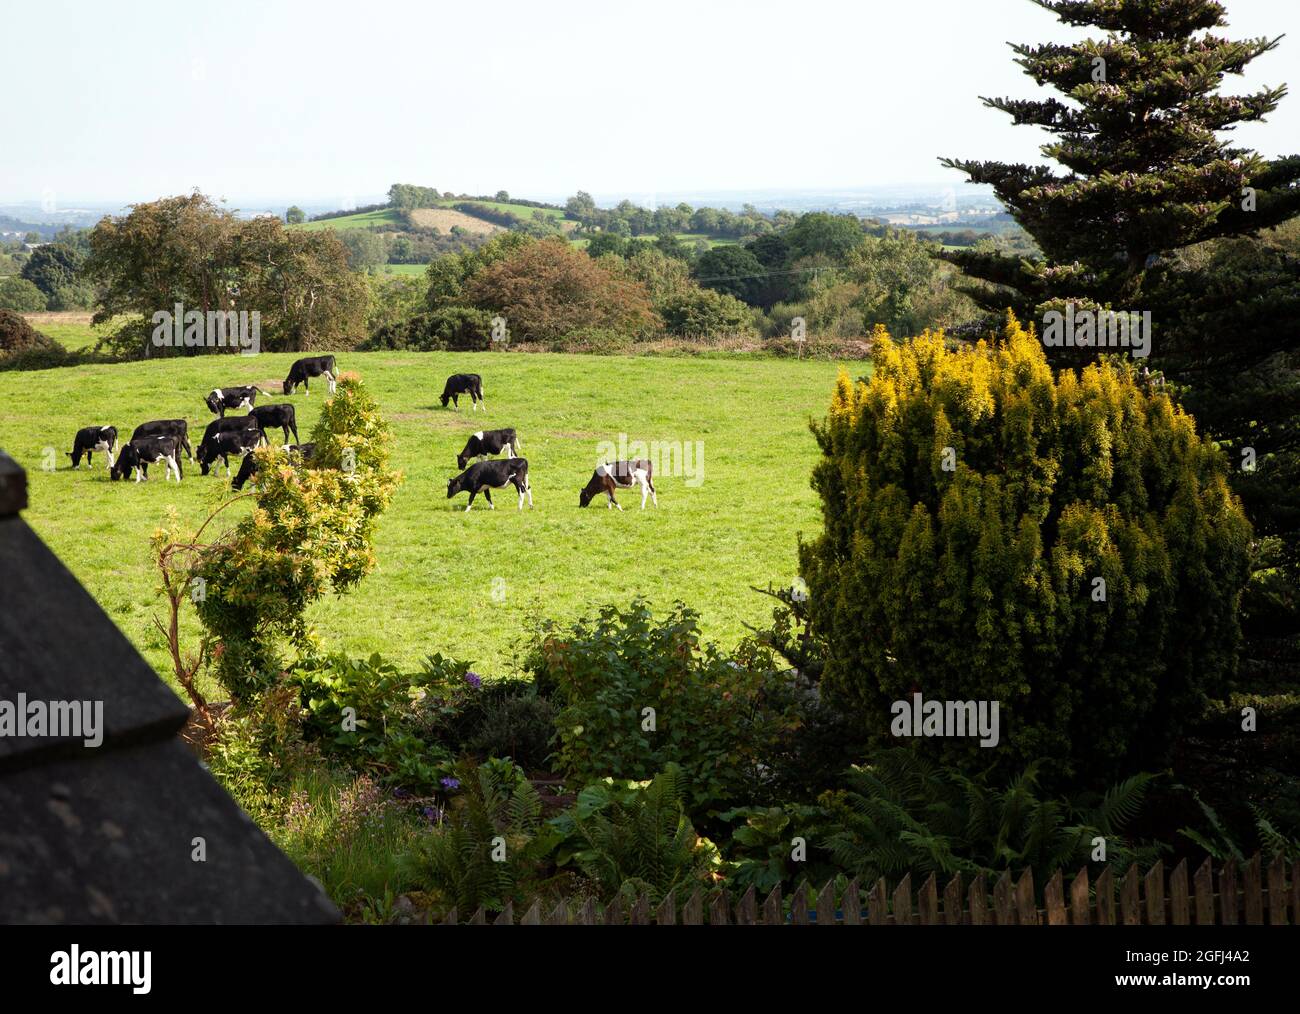 Calves enjoying their first outing in pasture, Drumlin country, Co Monaghan, Ireland Stock Photo